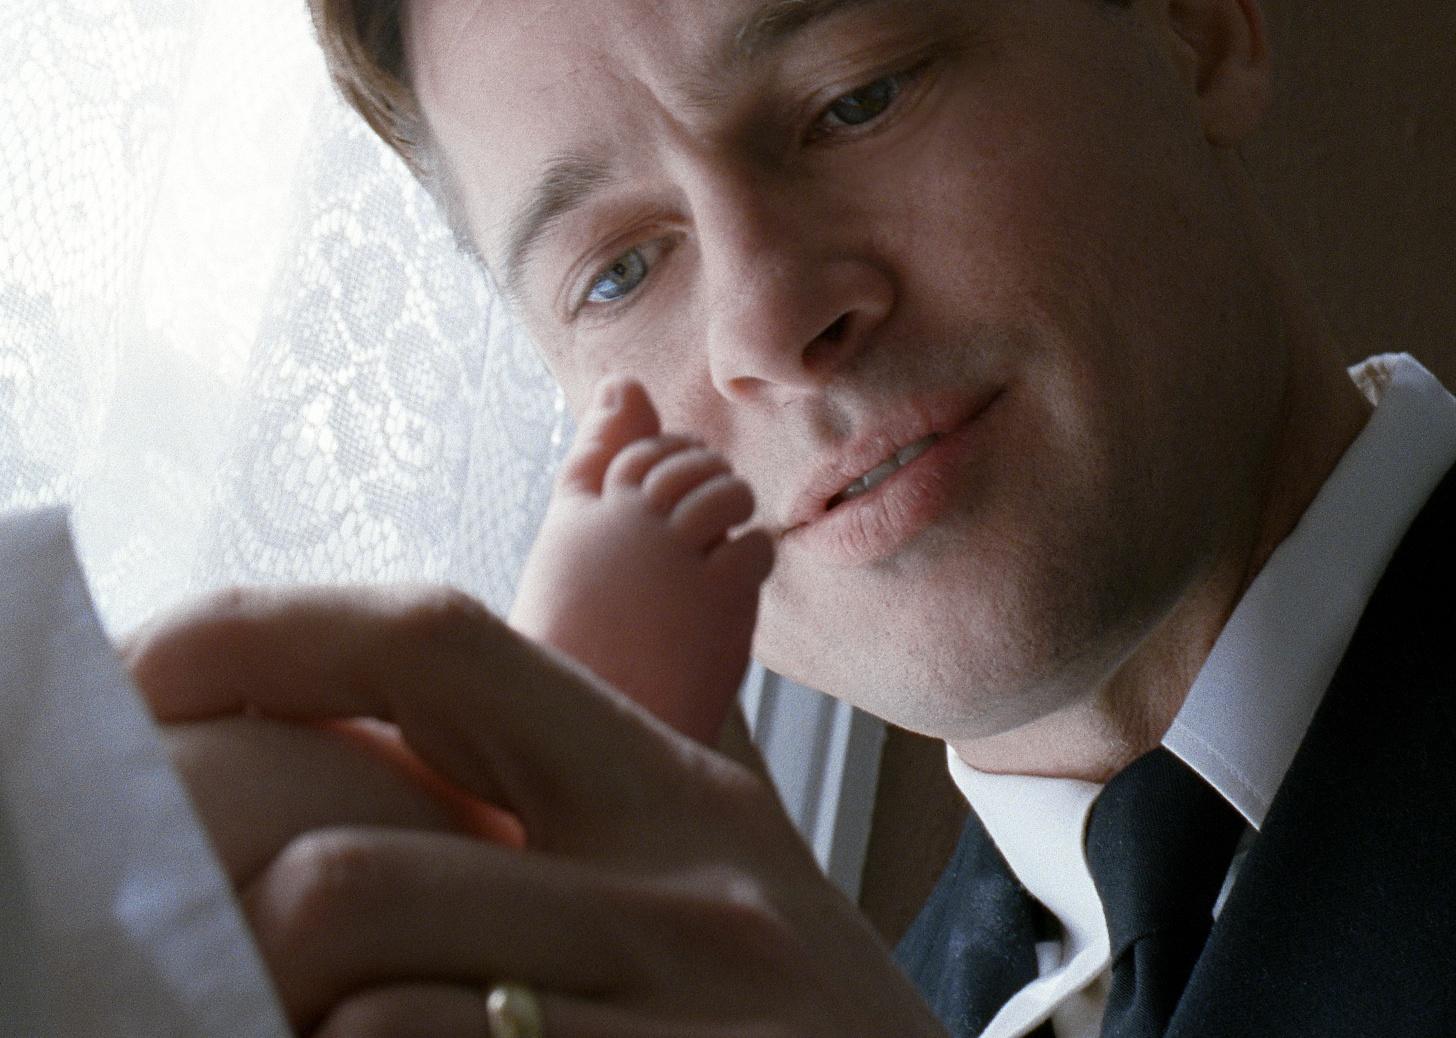 Brad Pitt holding and looking at a baby